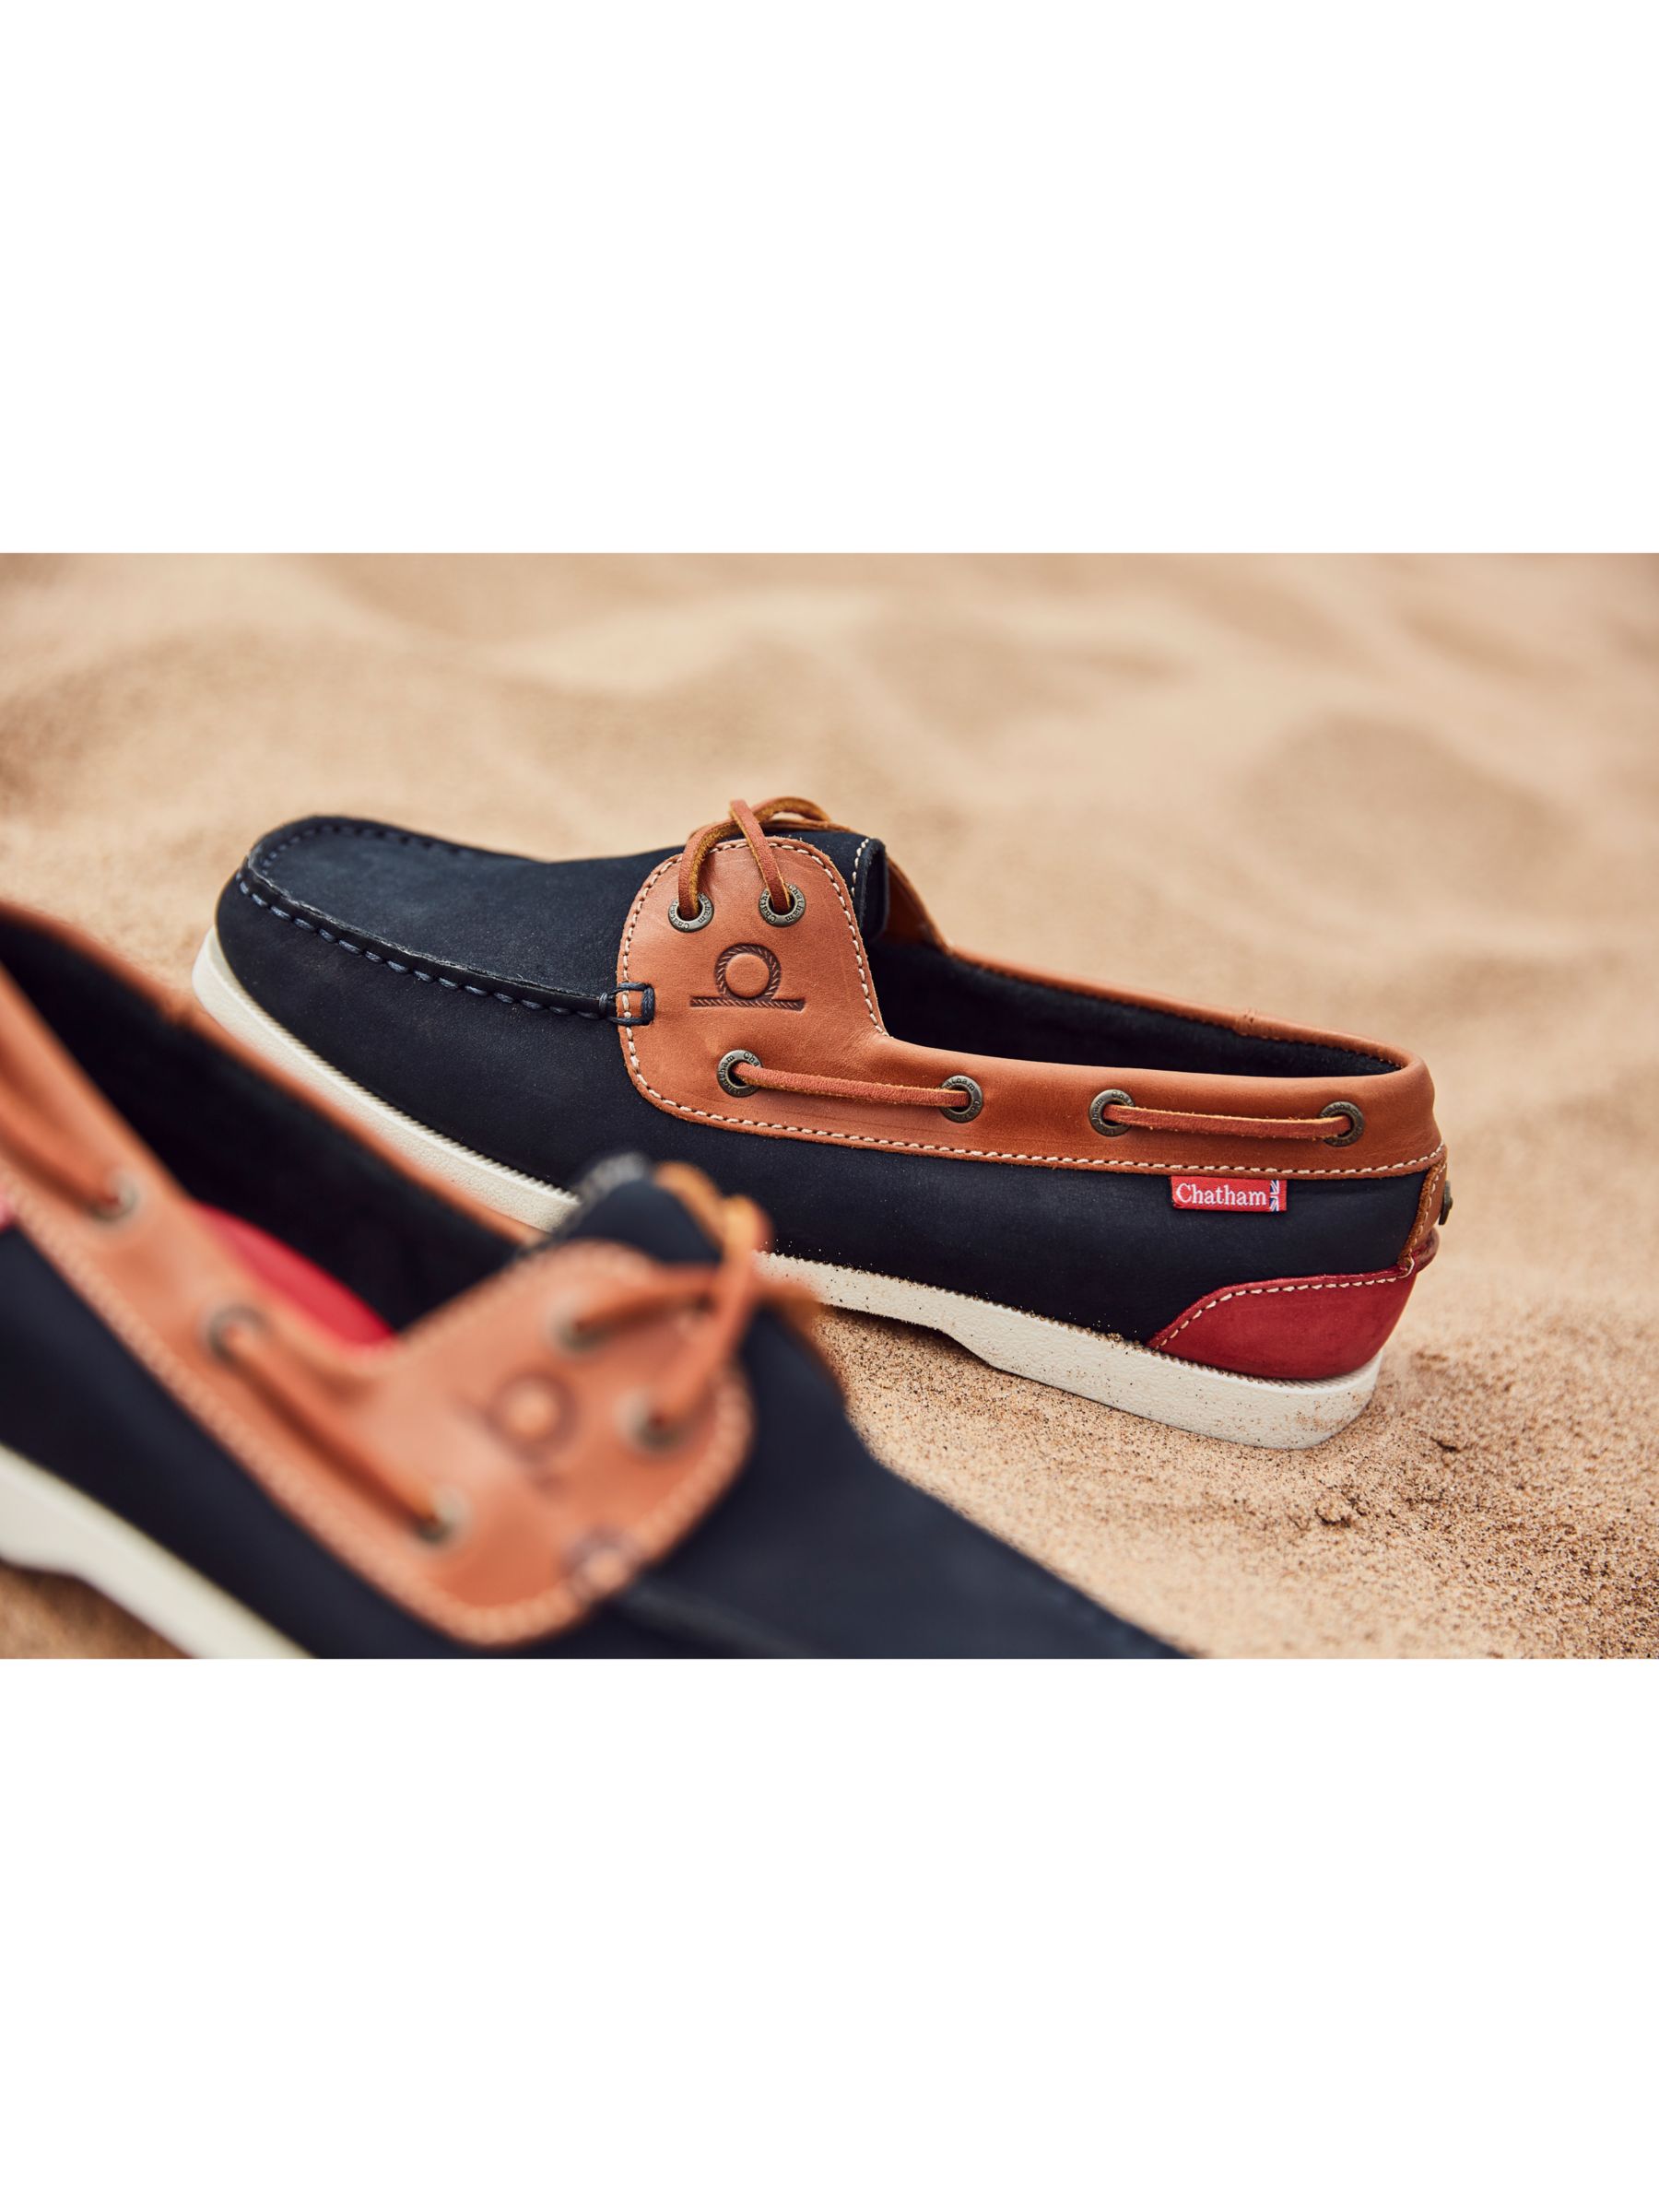 Chatham Gallery II Leather Boat Shoes, Navy/Tan, 7